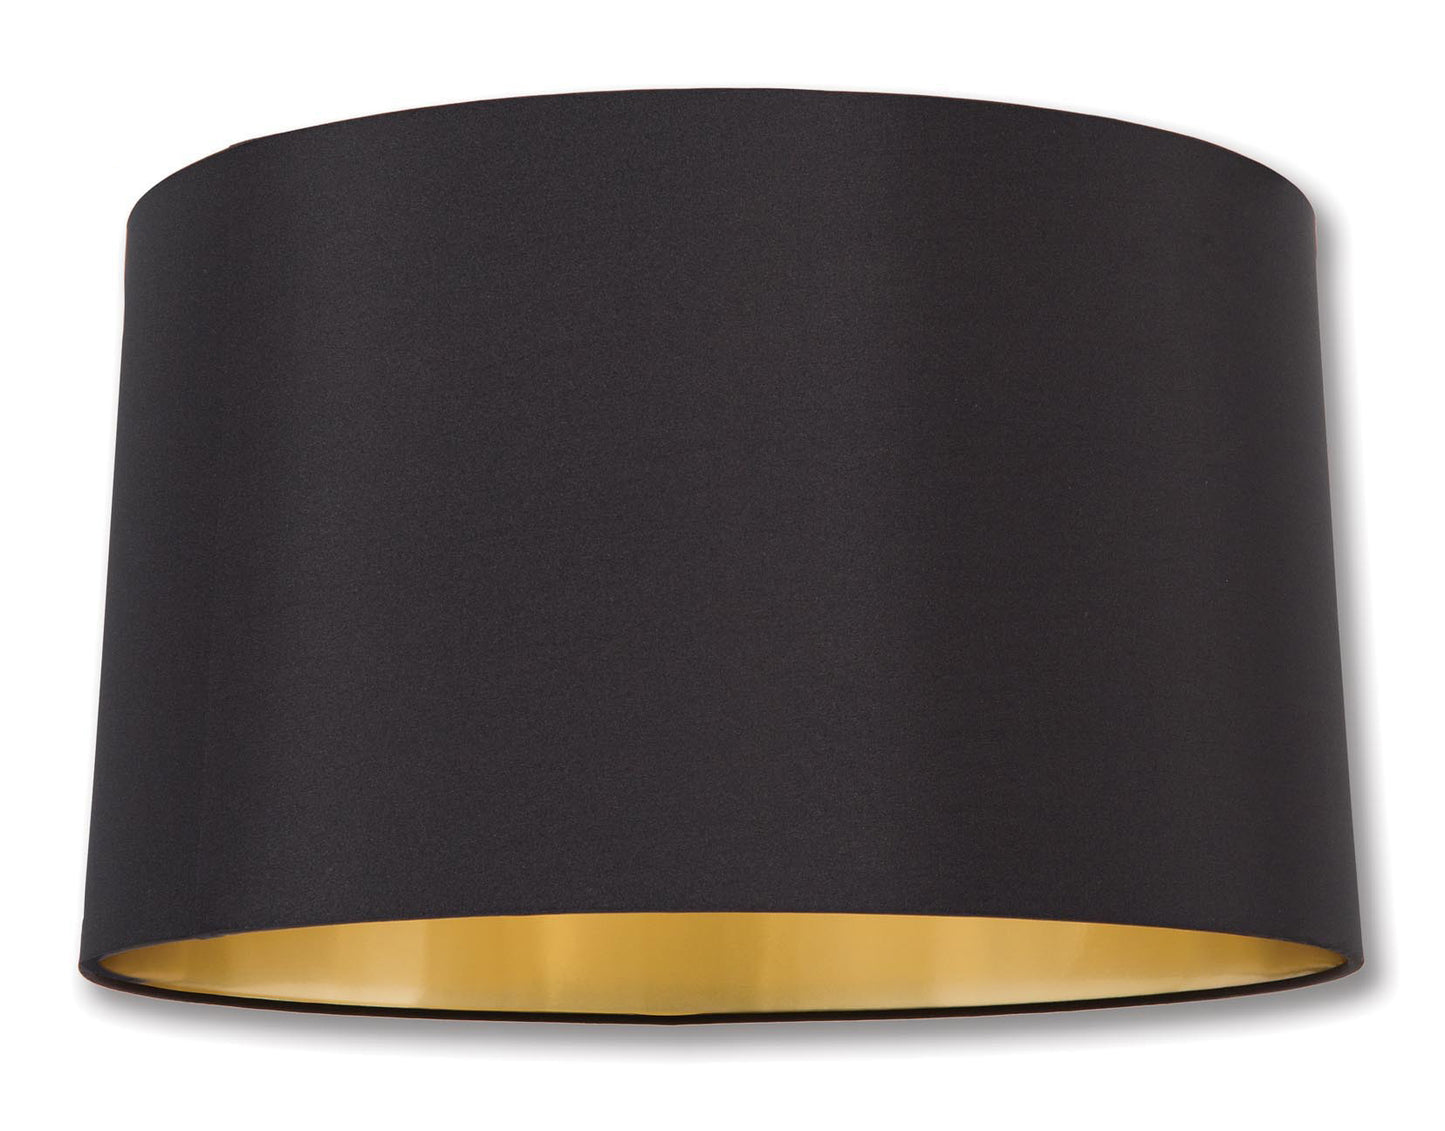 New Drum Style Lamp Shades - Black Color, Microfiber Chiffon Material w/Gold Foil Lining